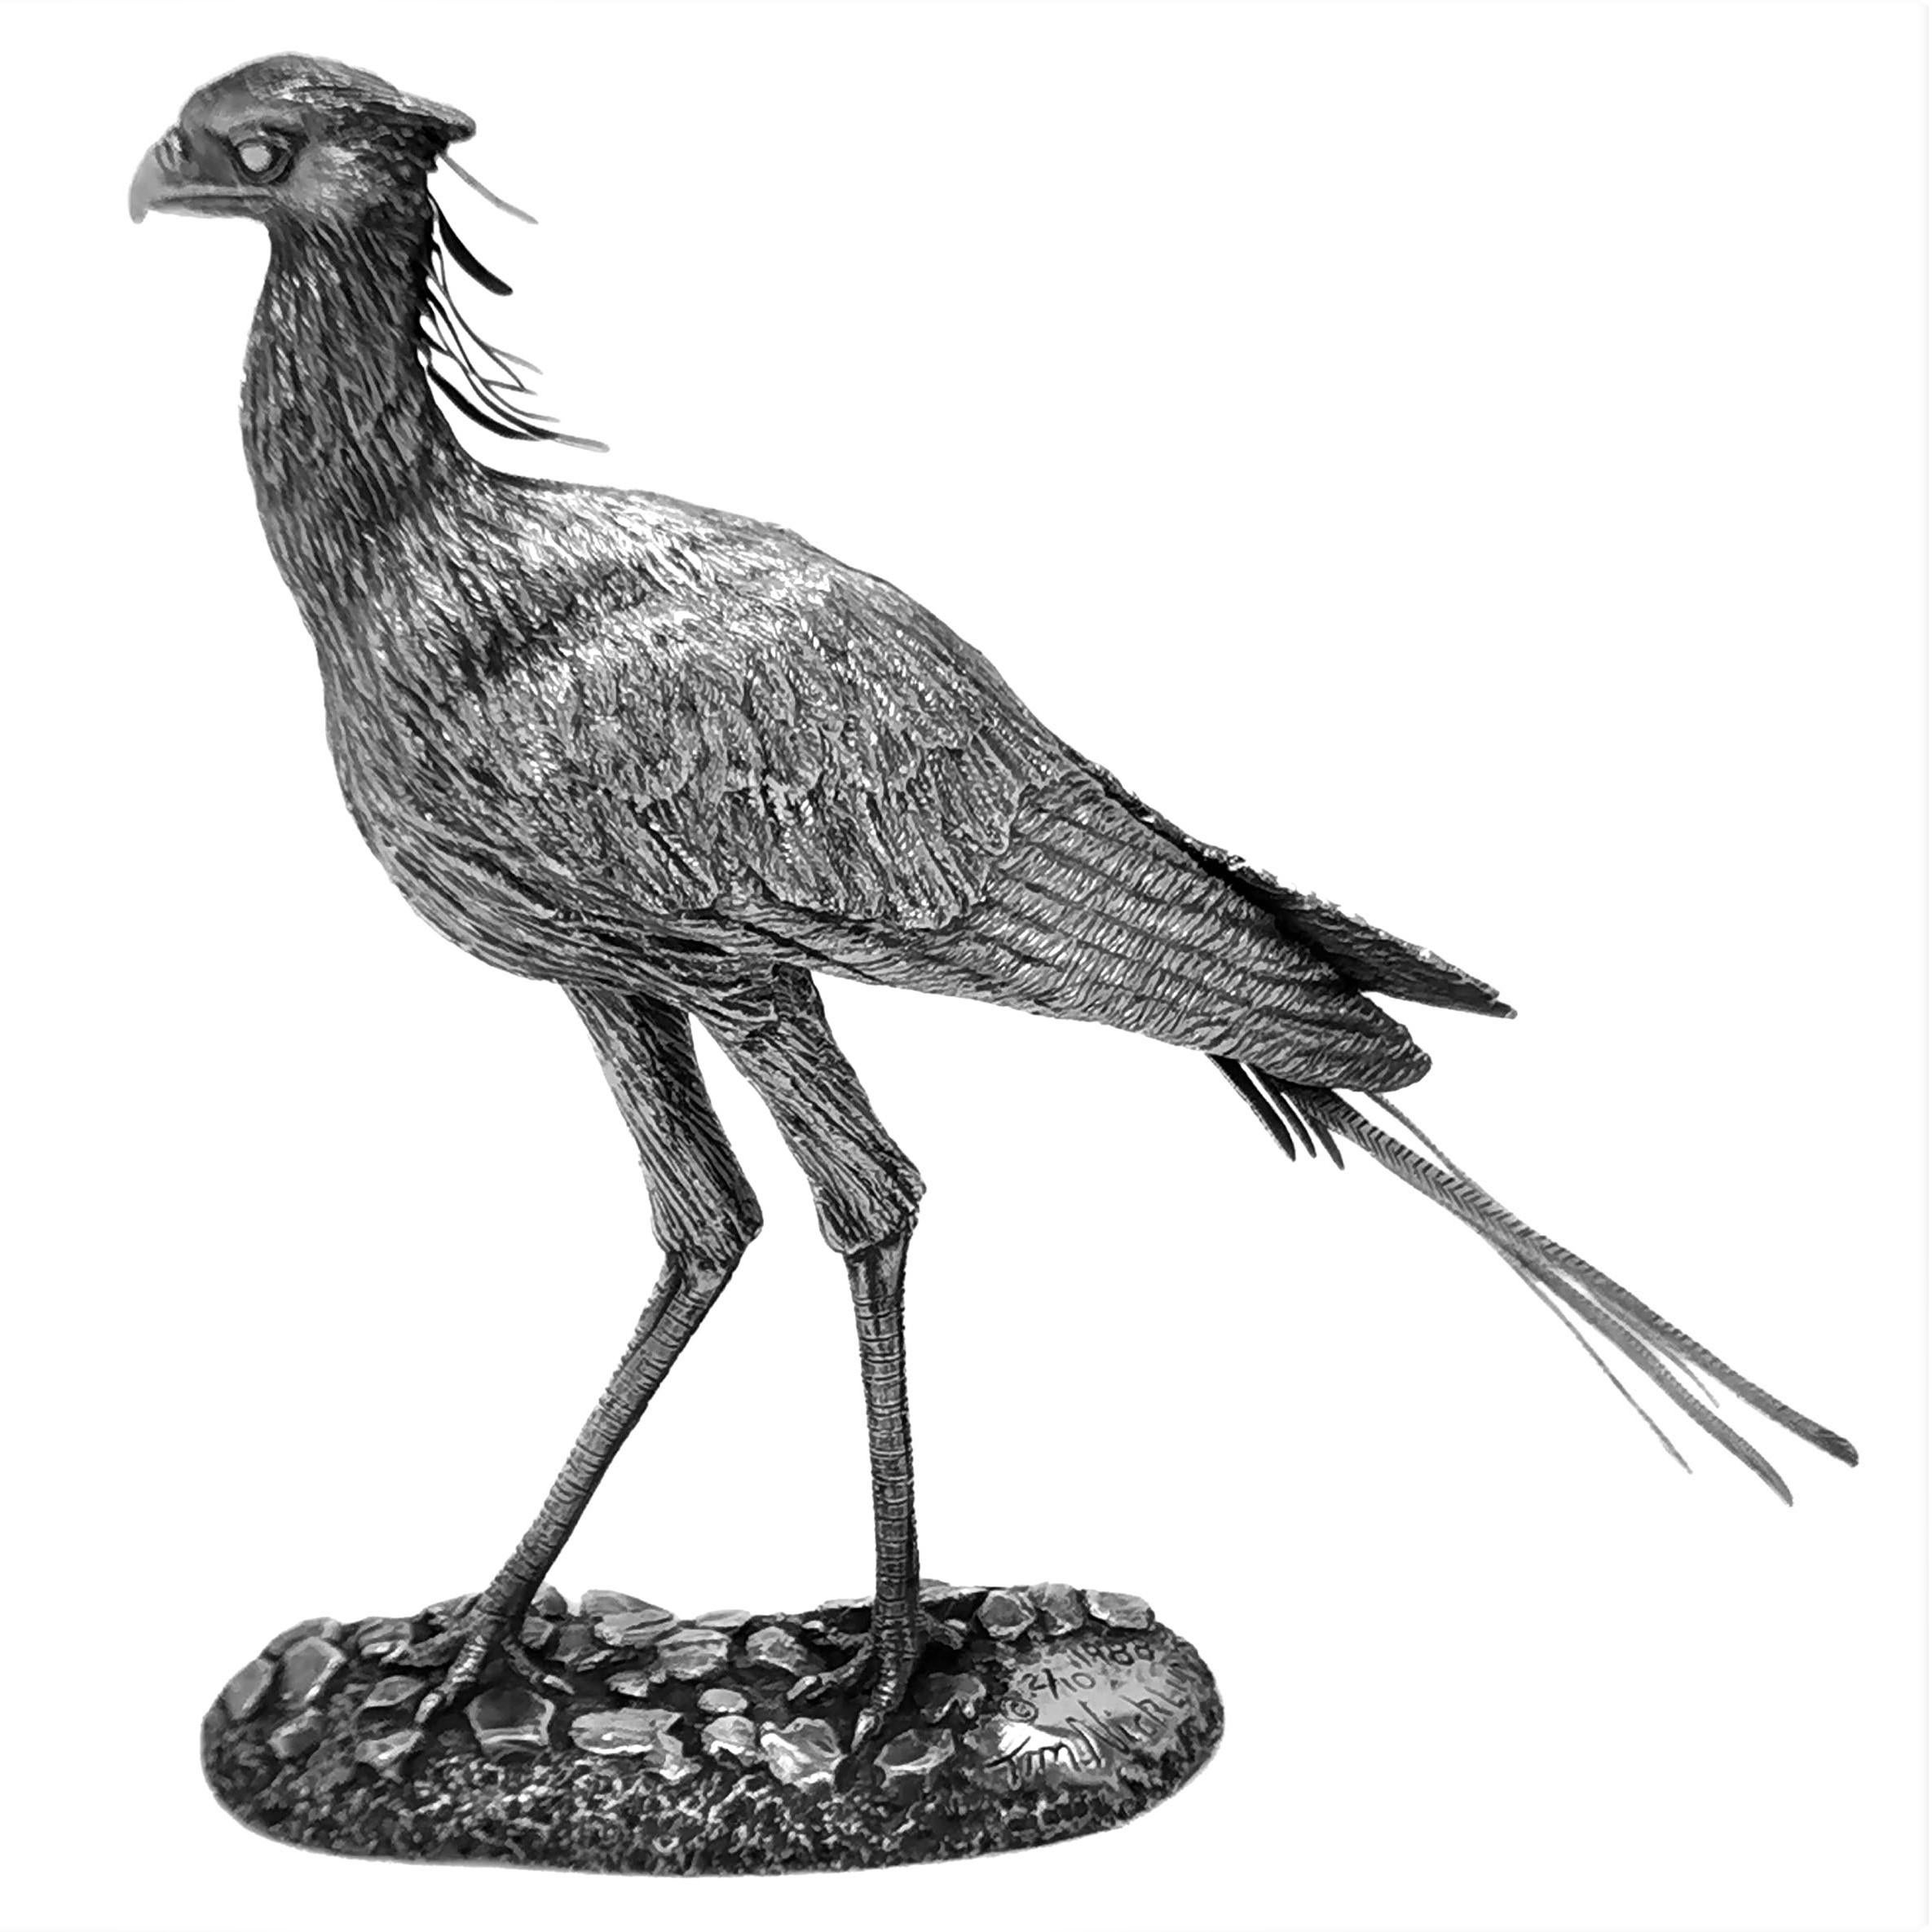 An impressive sterling silver model of an African Secretary Bird by Kenyan Sculptor Tim Nicklin.

The Model was sculpted by Tim Nicklin in 1988 and Hallmarked in London in 1990. The Crane is edition 2 of 10.

The Model Crowned Crane has a full